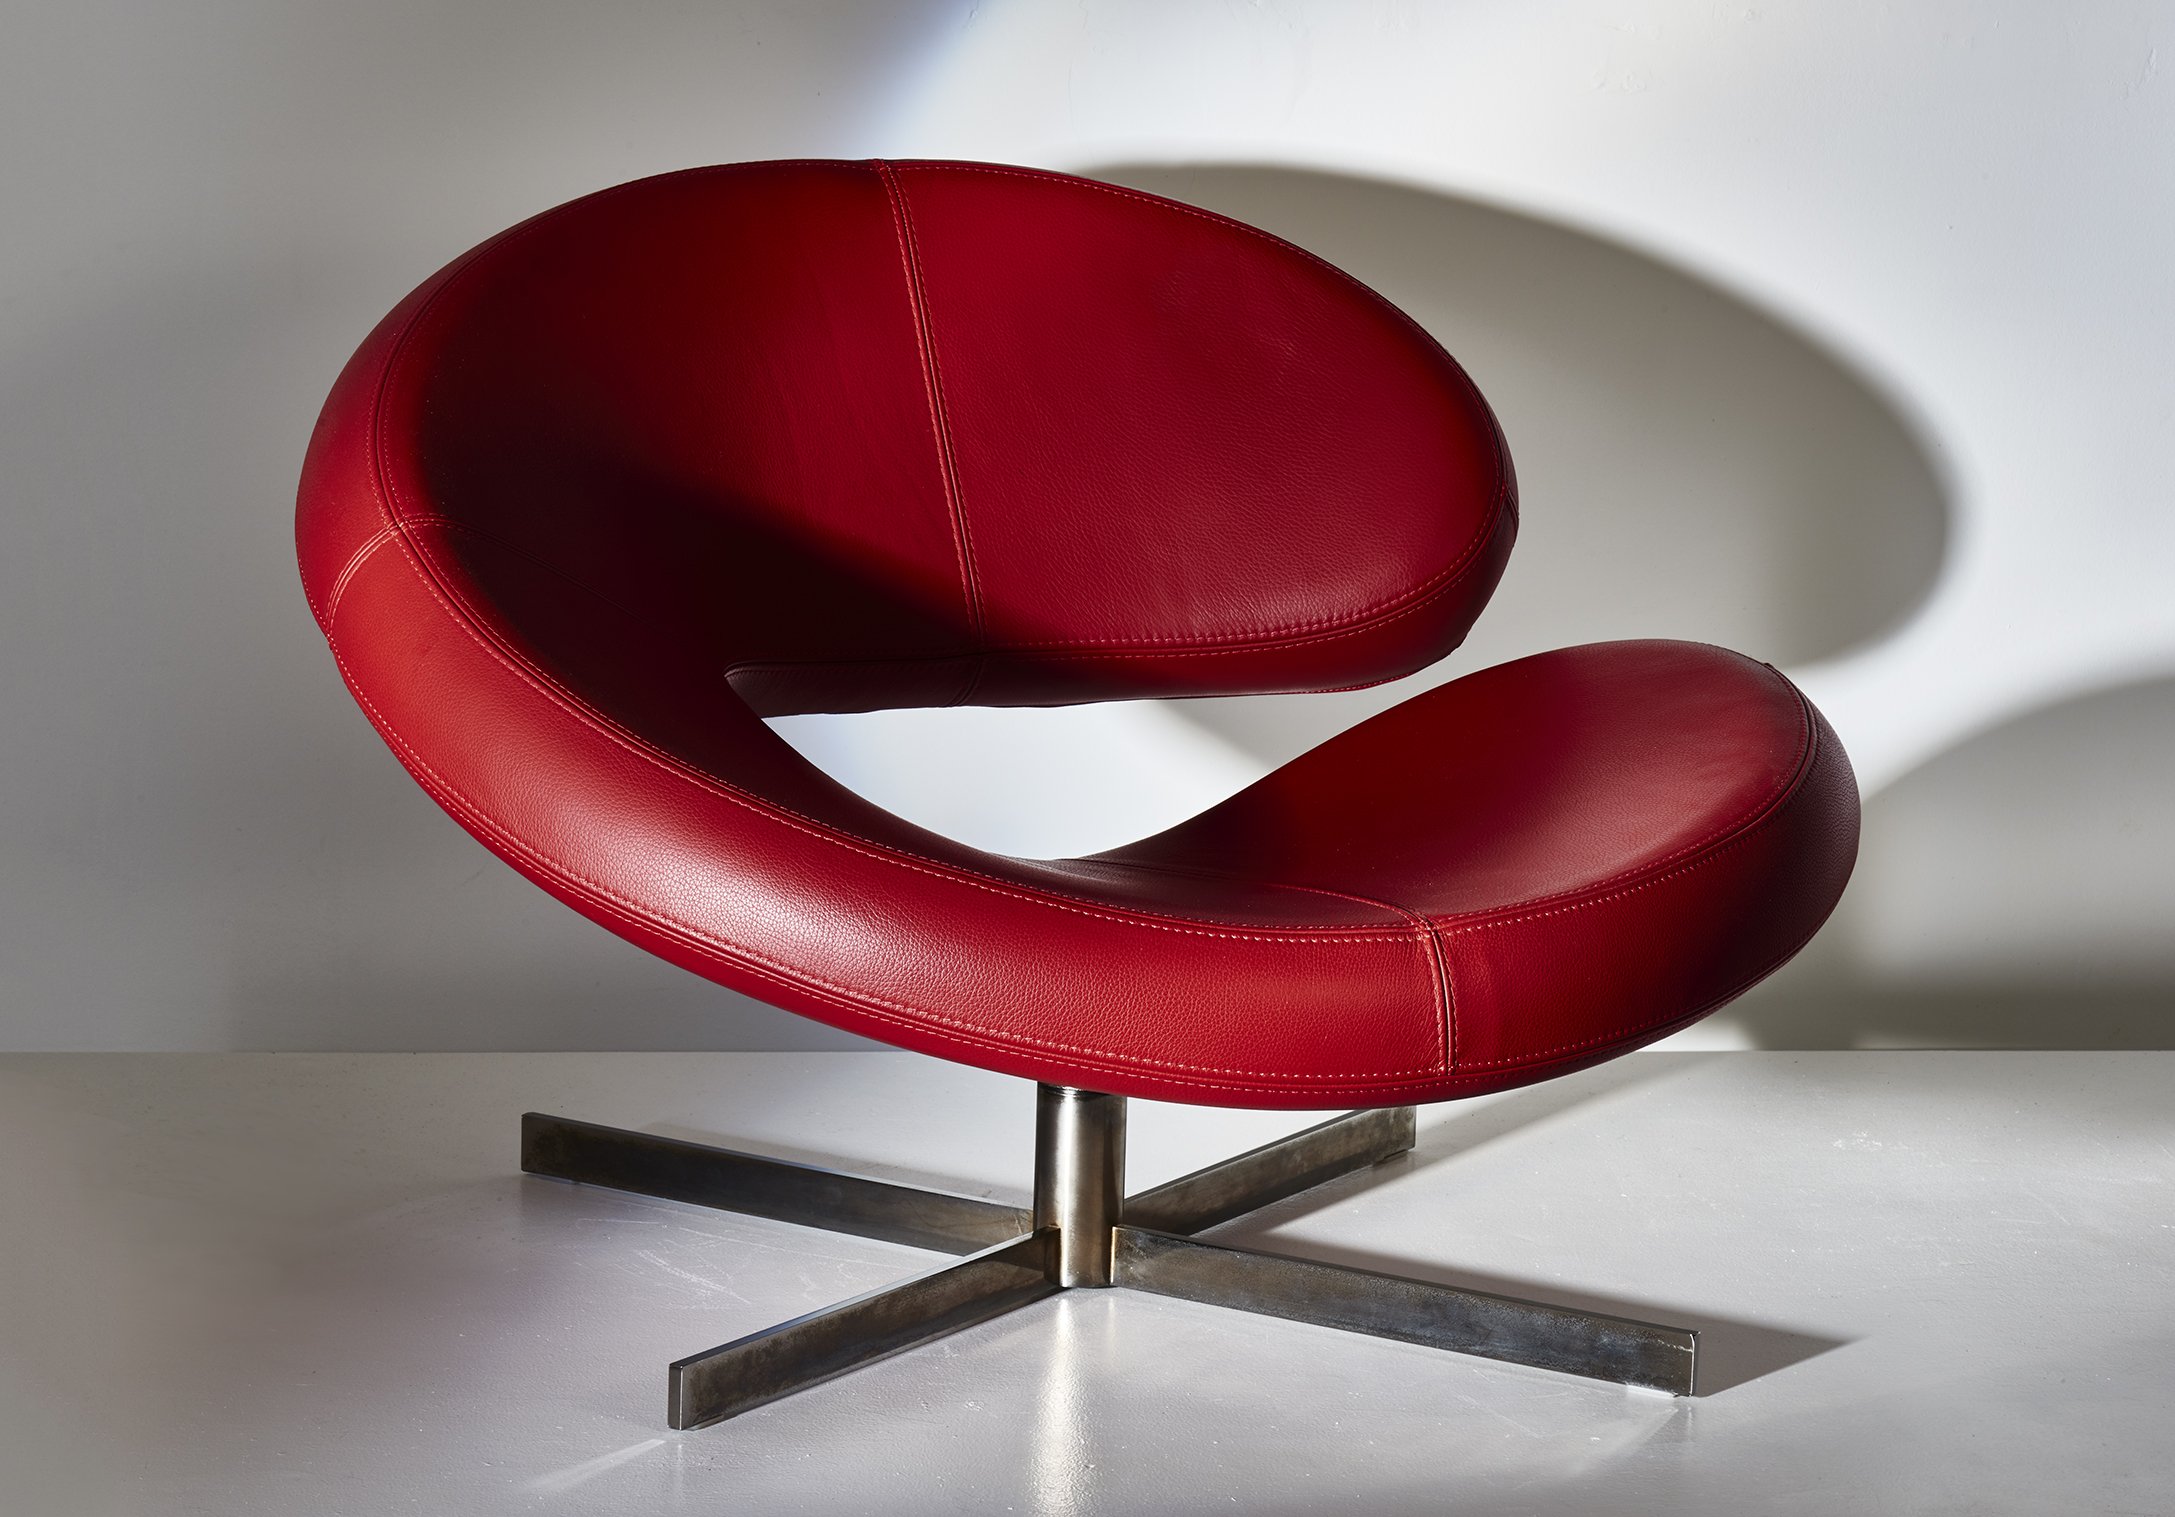 Swivel Chair "Nuage" by Robert Tapinassi with Maurizio Manzoni for Roche  Bobois — The S. pace Detroit